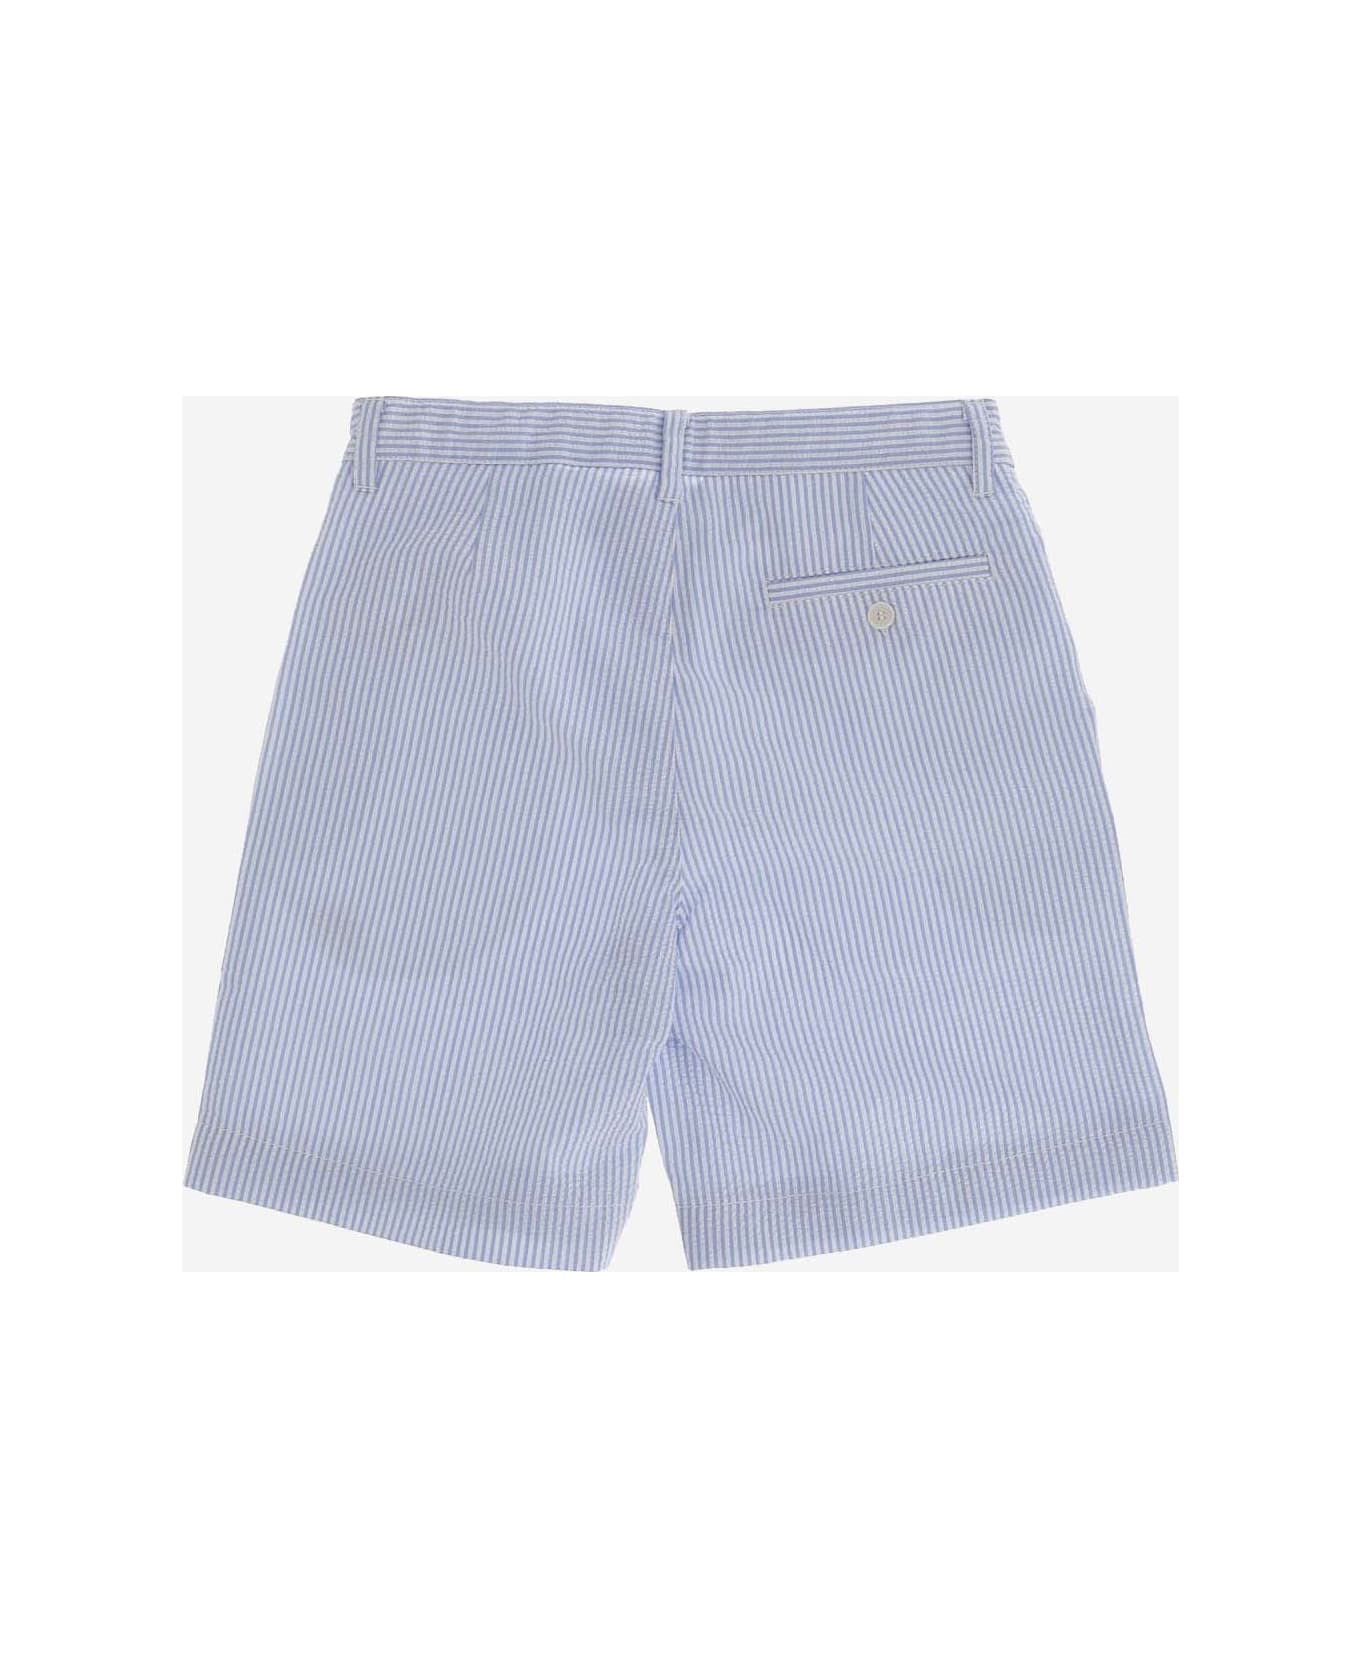 Il Gufo Cotton Short Pants With Striped Pattern - Clear Blue ボトムス